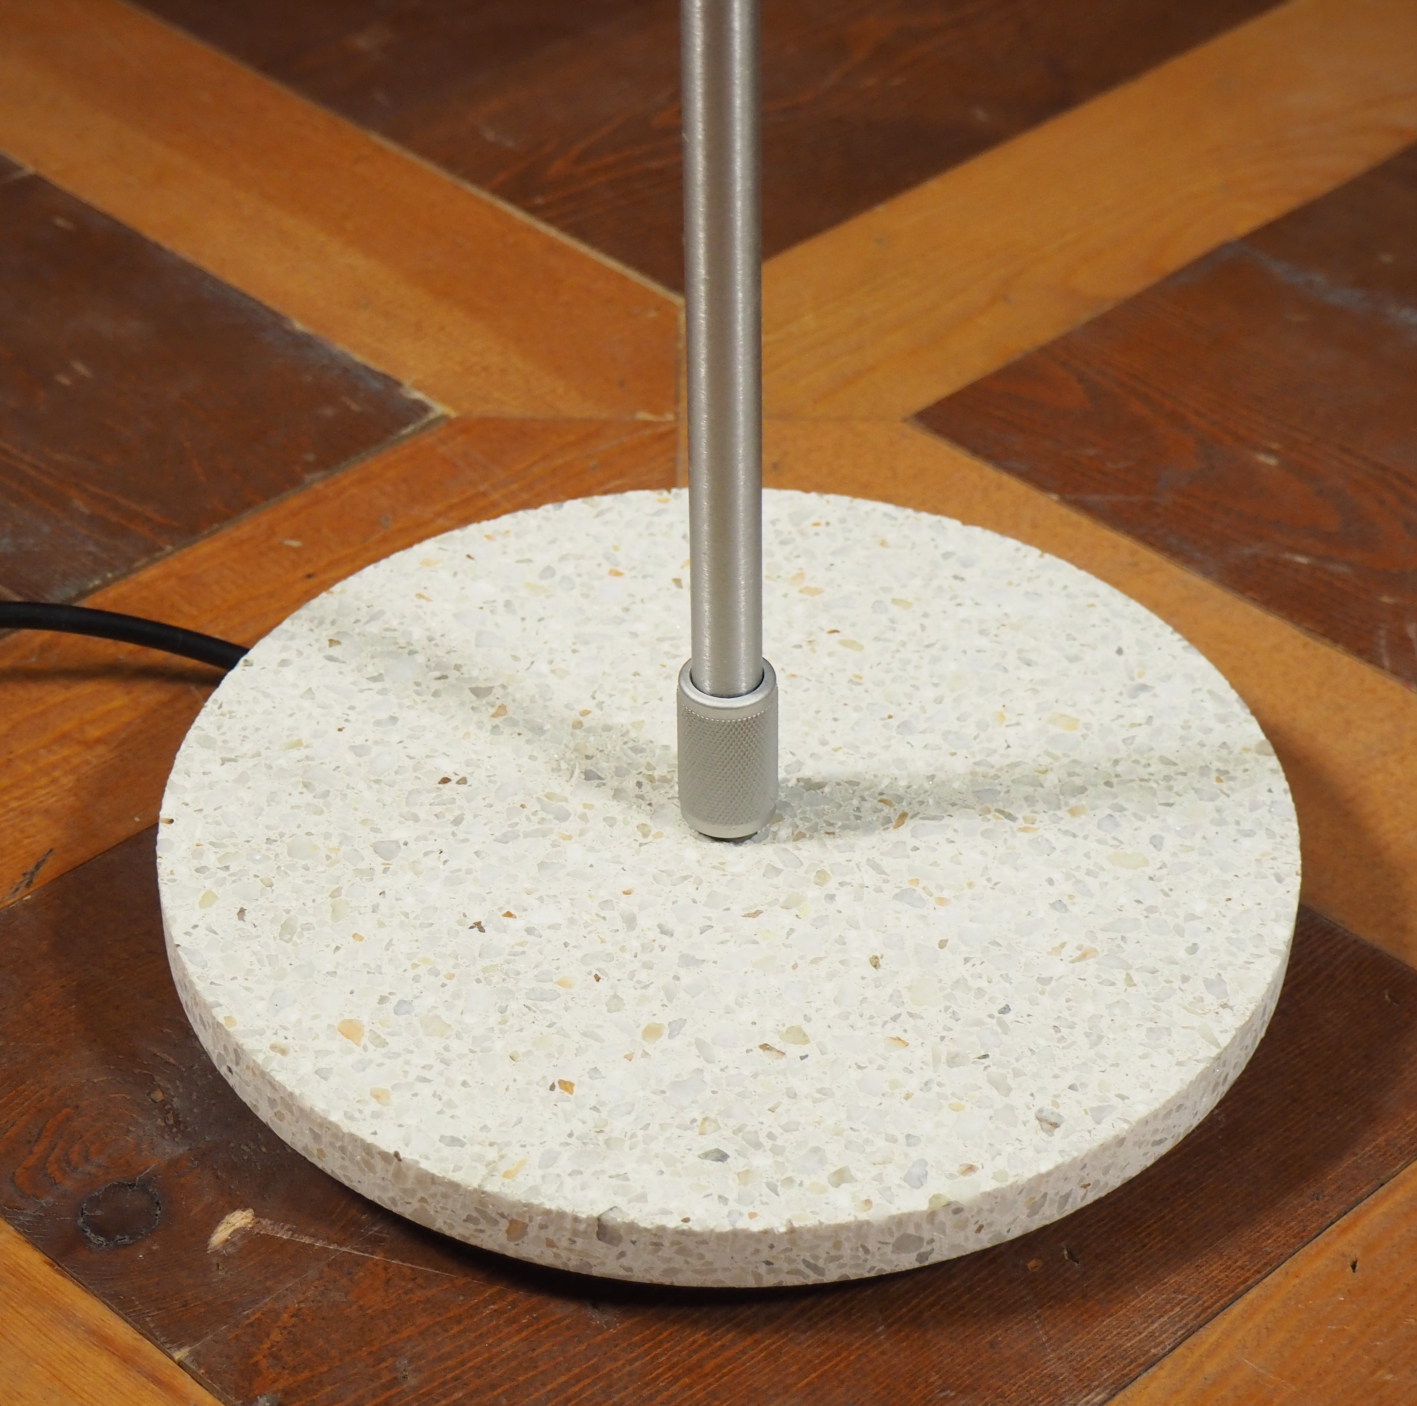 Floor lamp 'Costanza' by Paolo Rizzatto for Luceplan ca. 1986 with Terrazzo base